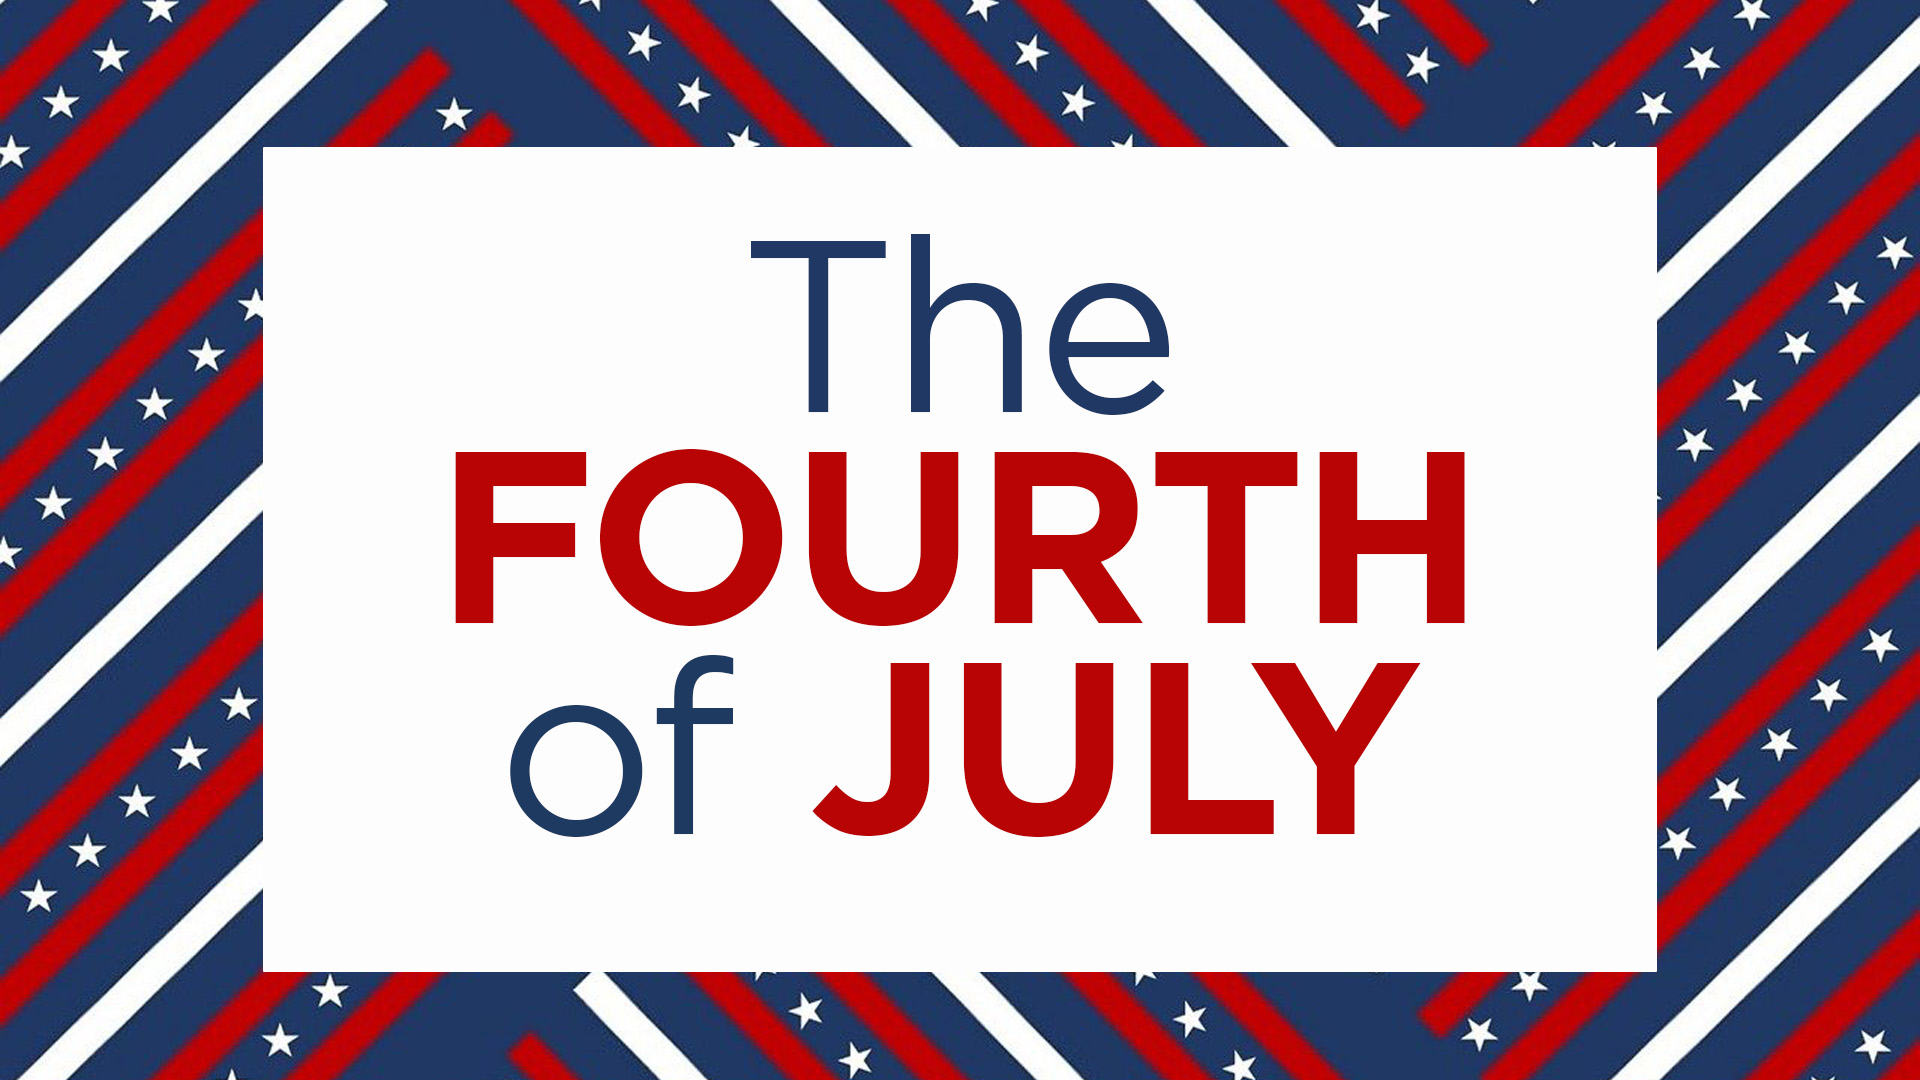 Blue background with white, red and white stars making up stripes going at different angles. There is a white rectangle in the center of the image that reads The Fourth of July written in a red and blue bold.